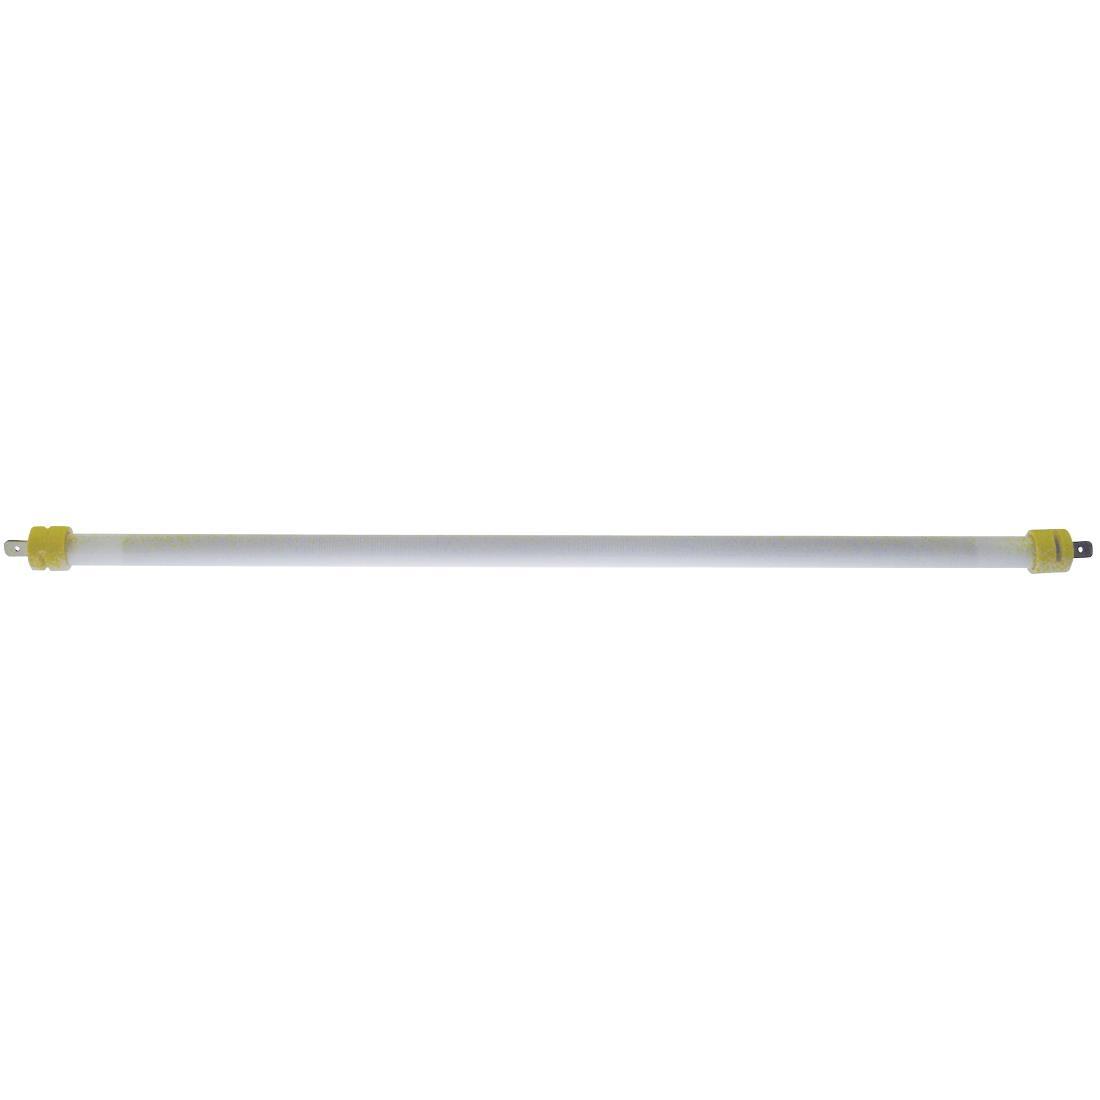 Element for Roller Grill Bar 2000, Bar 1000 - AA459  - 1